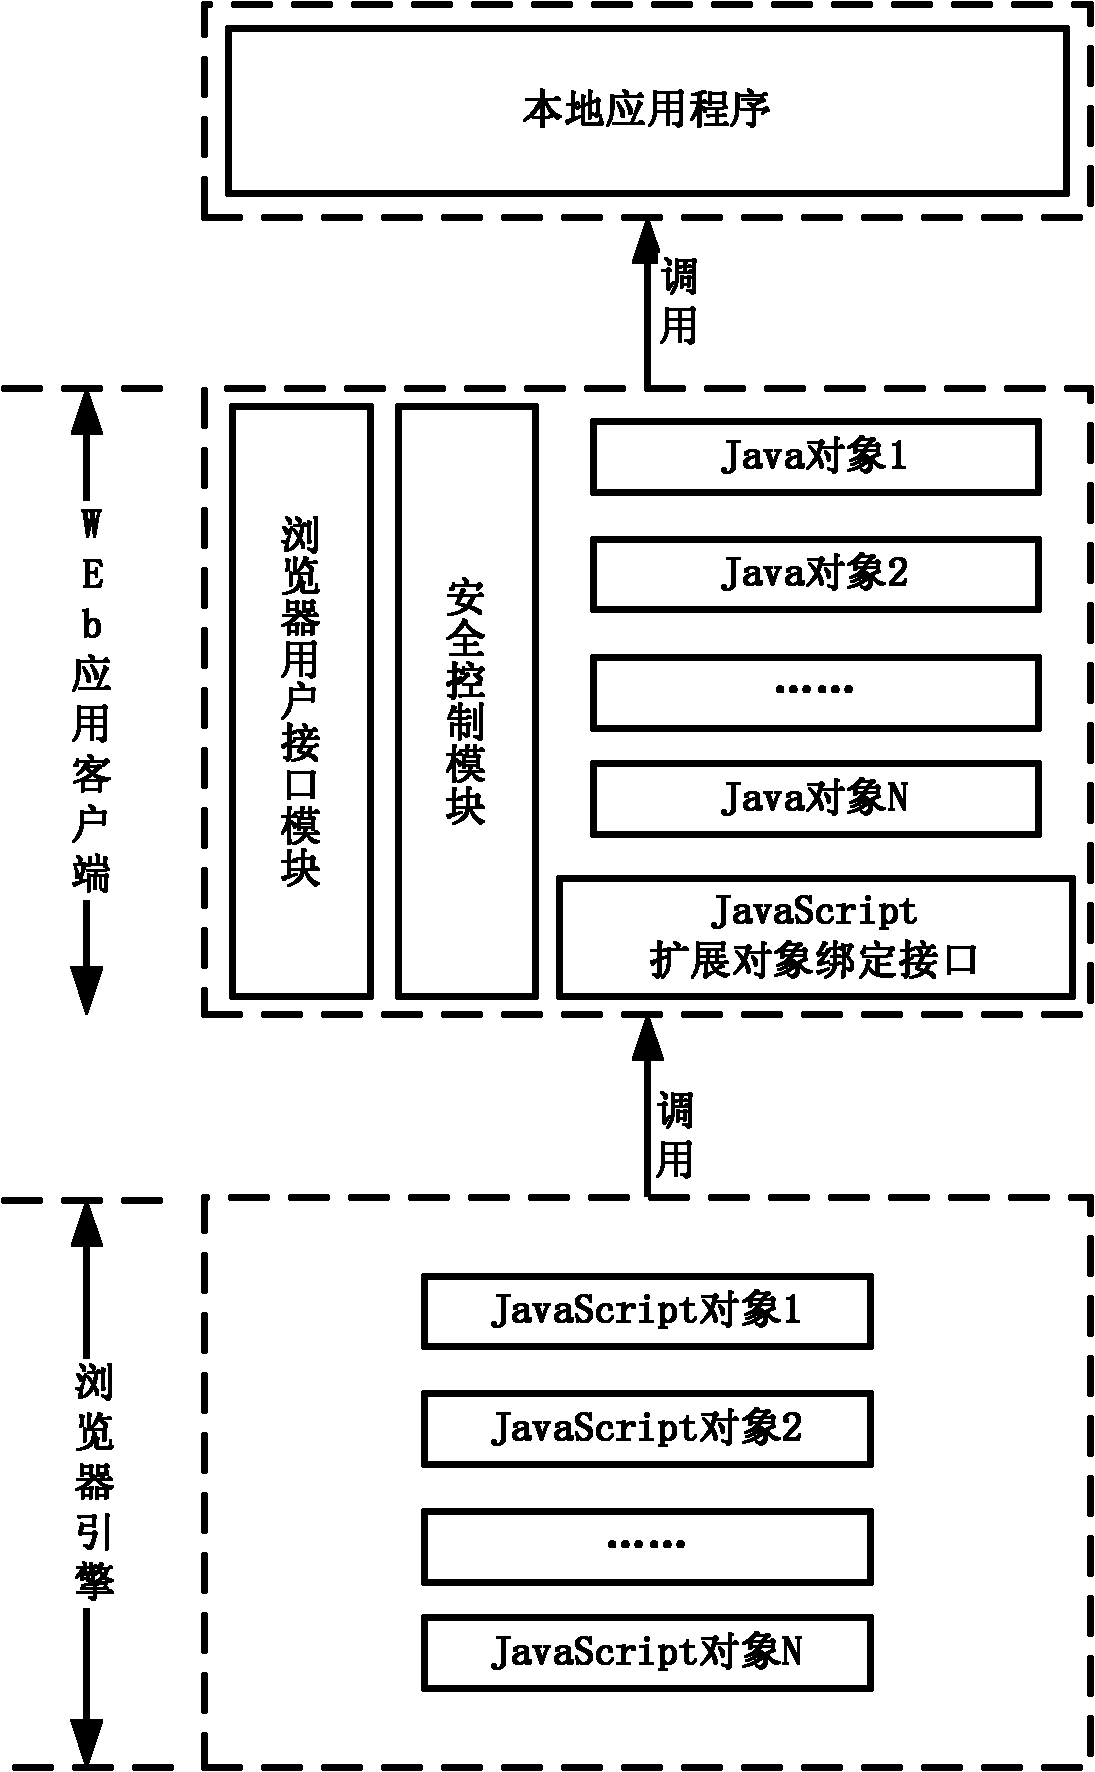 Realizing method of JavaScript extended object based on Android platform, and binding interface structure